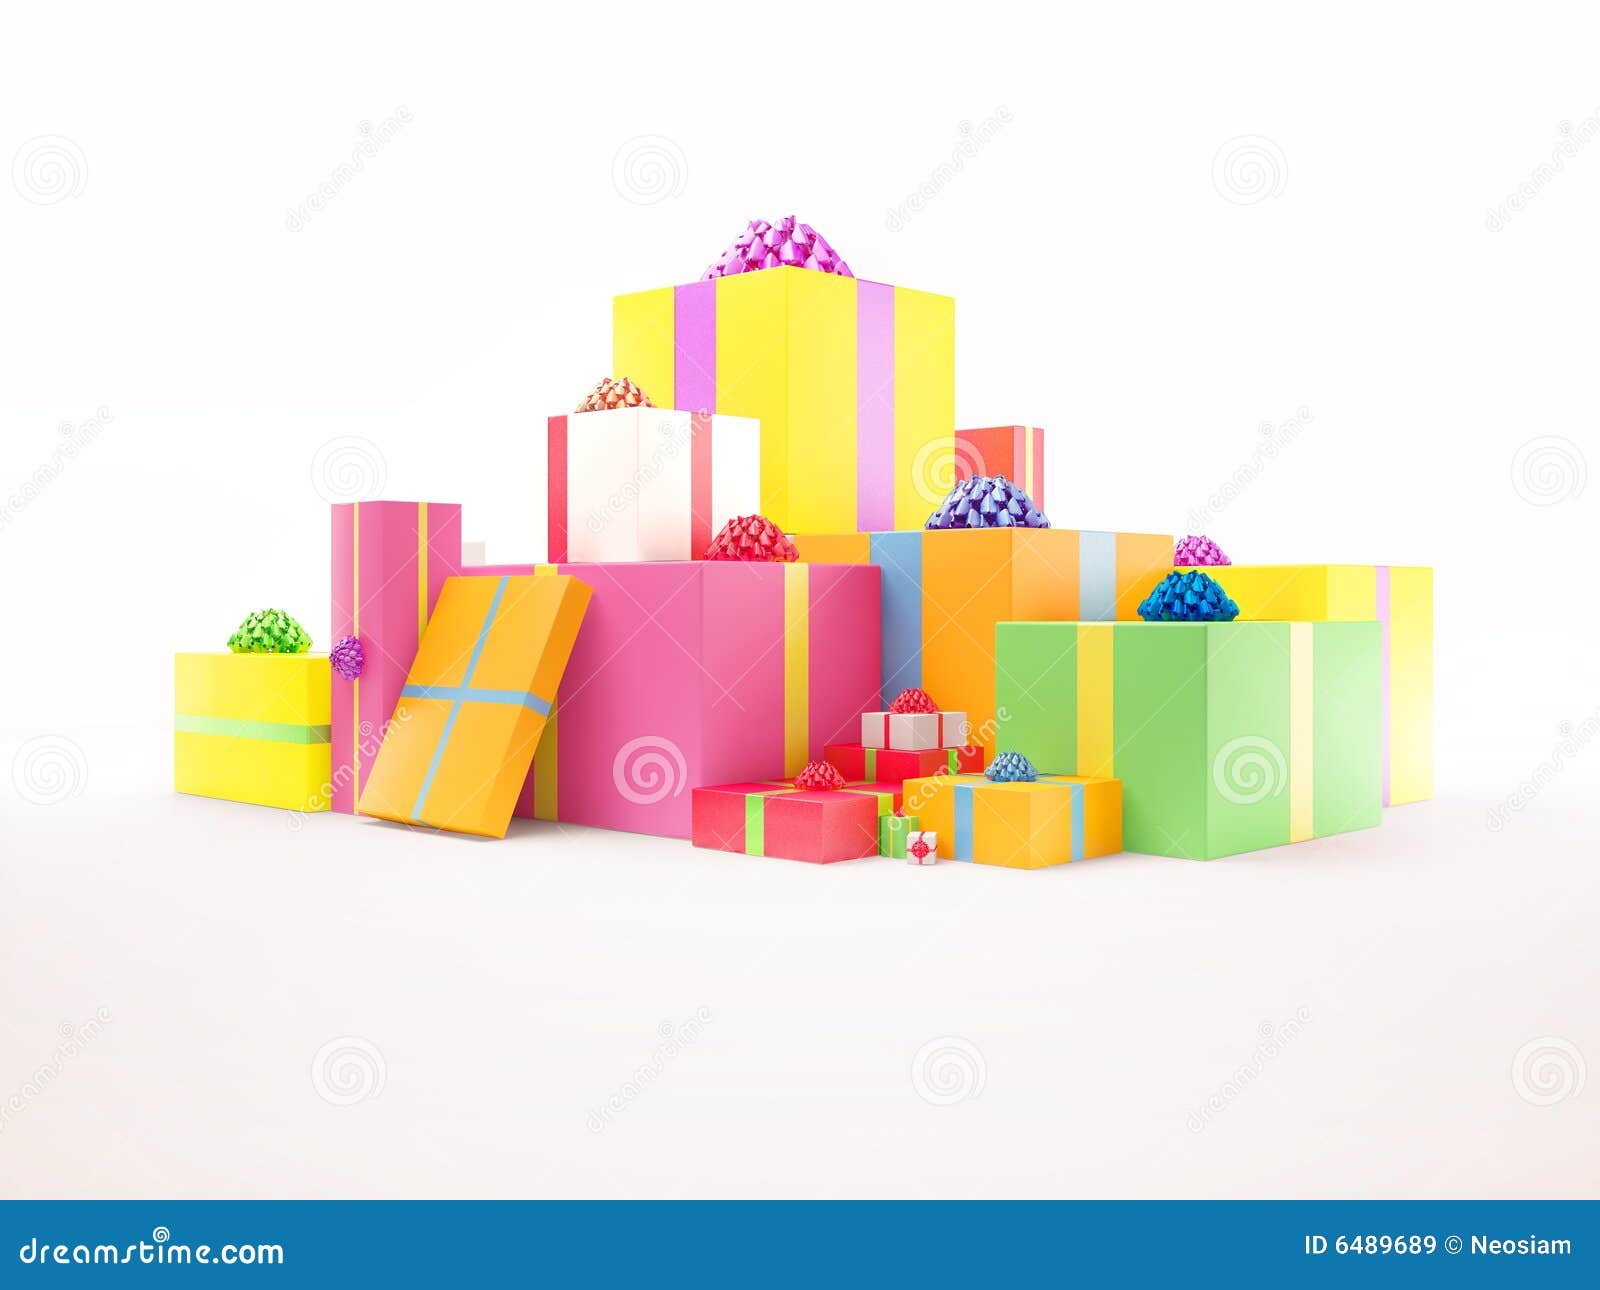 Colorful Gift Boxes set stock illustration. Illustration of colorful ...